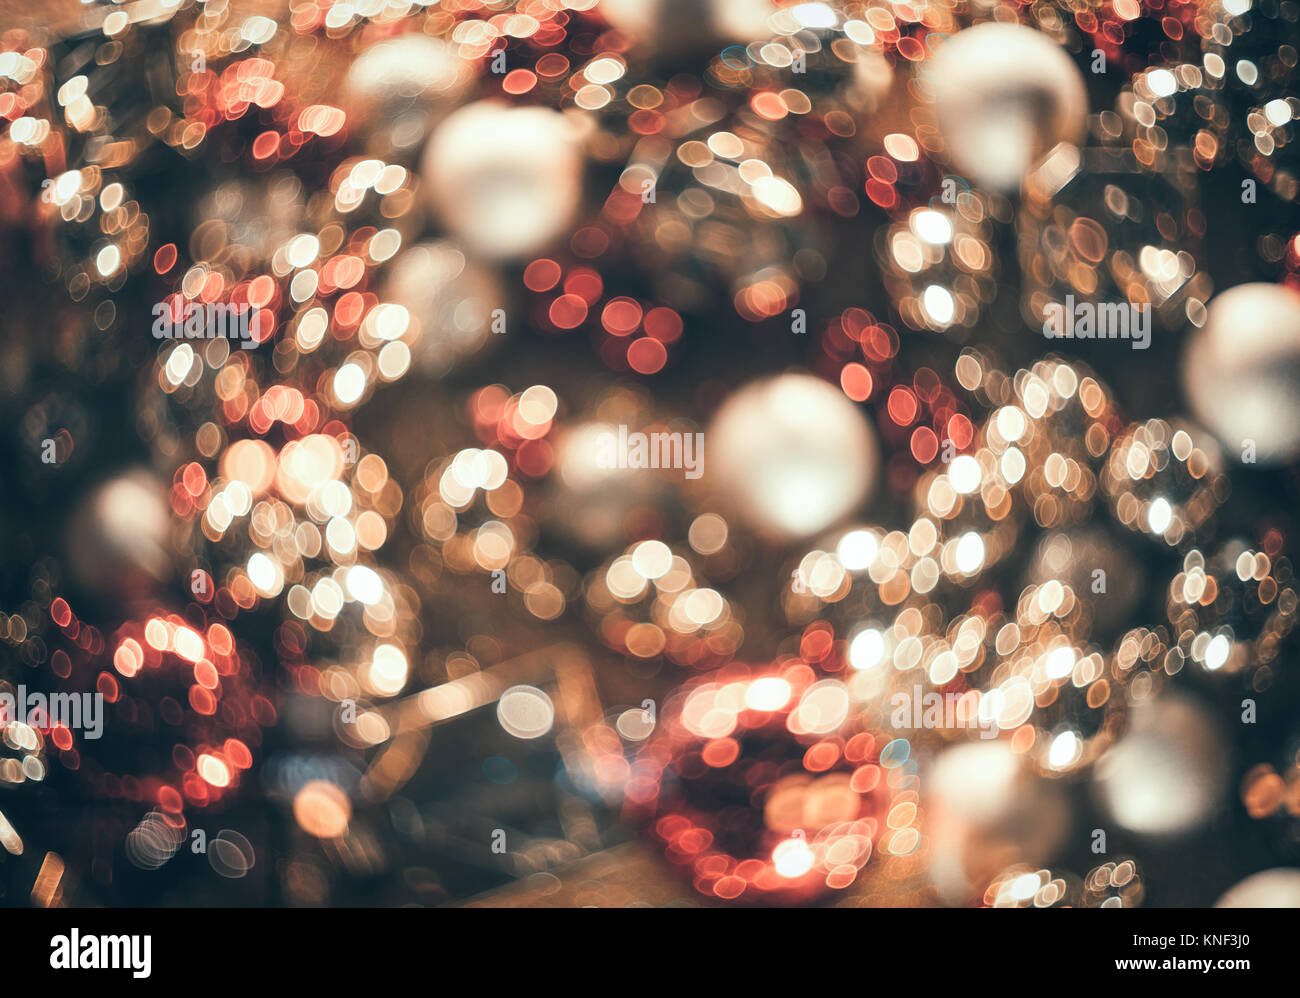 Bokeh. New Year bokeh background. Abstract background with colorful bokeh. Defocused lights. Background for Christmas cards. Beautiful blurred christm Stock Photo